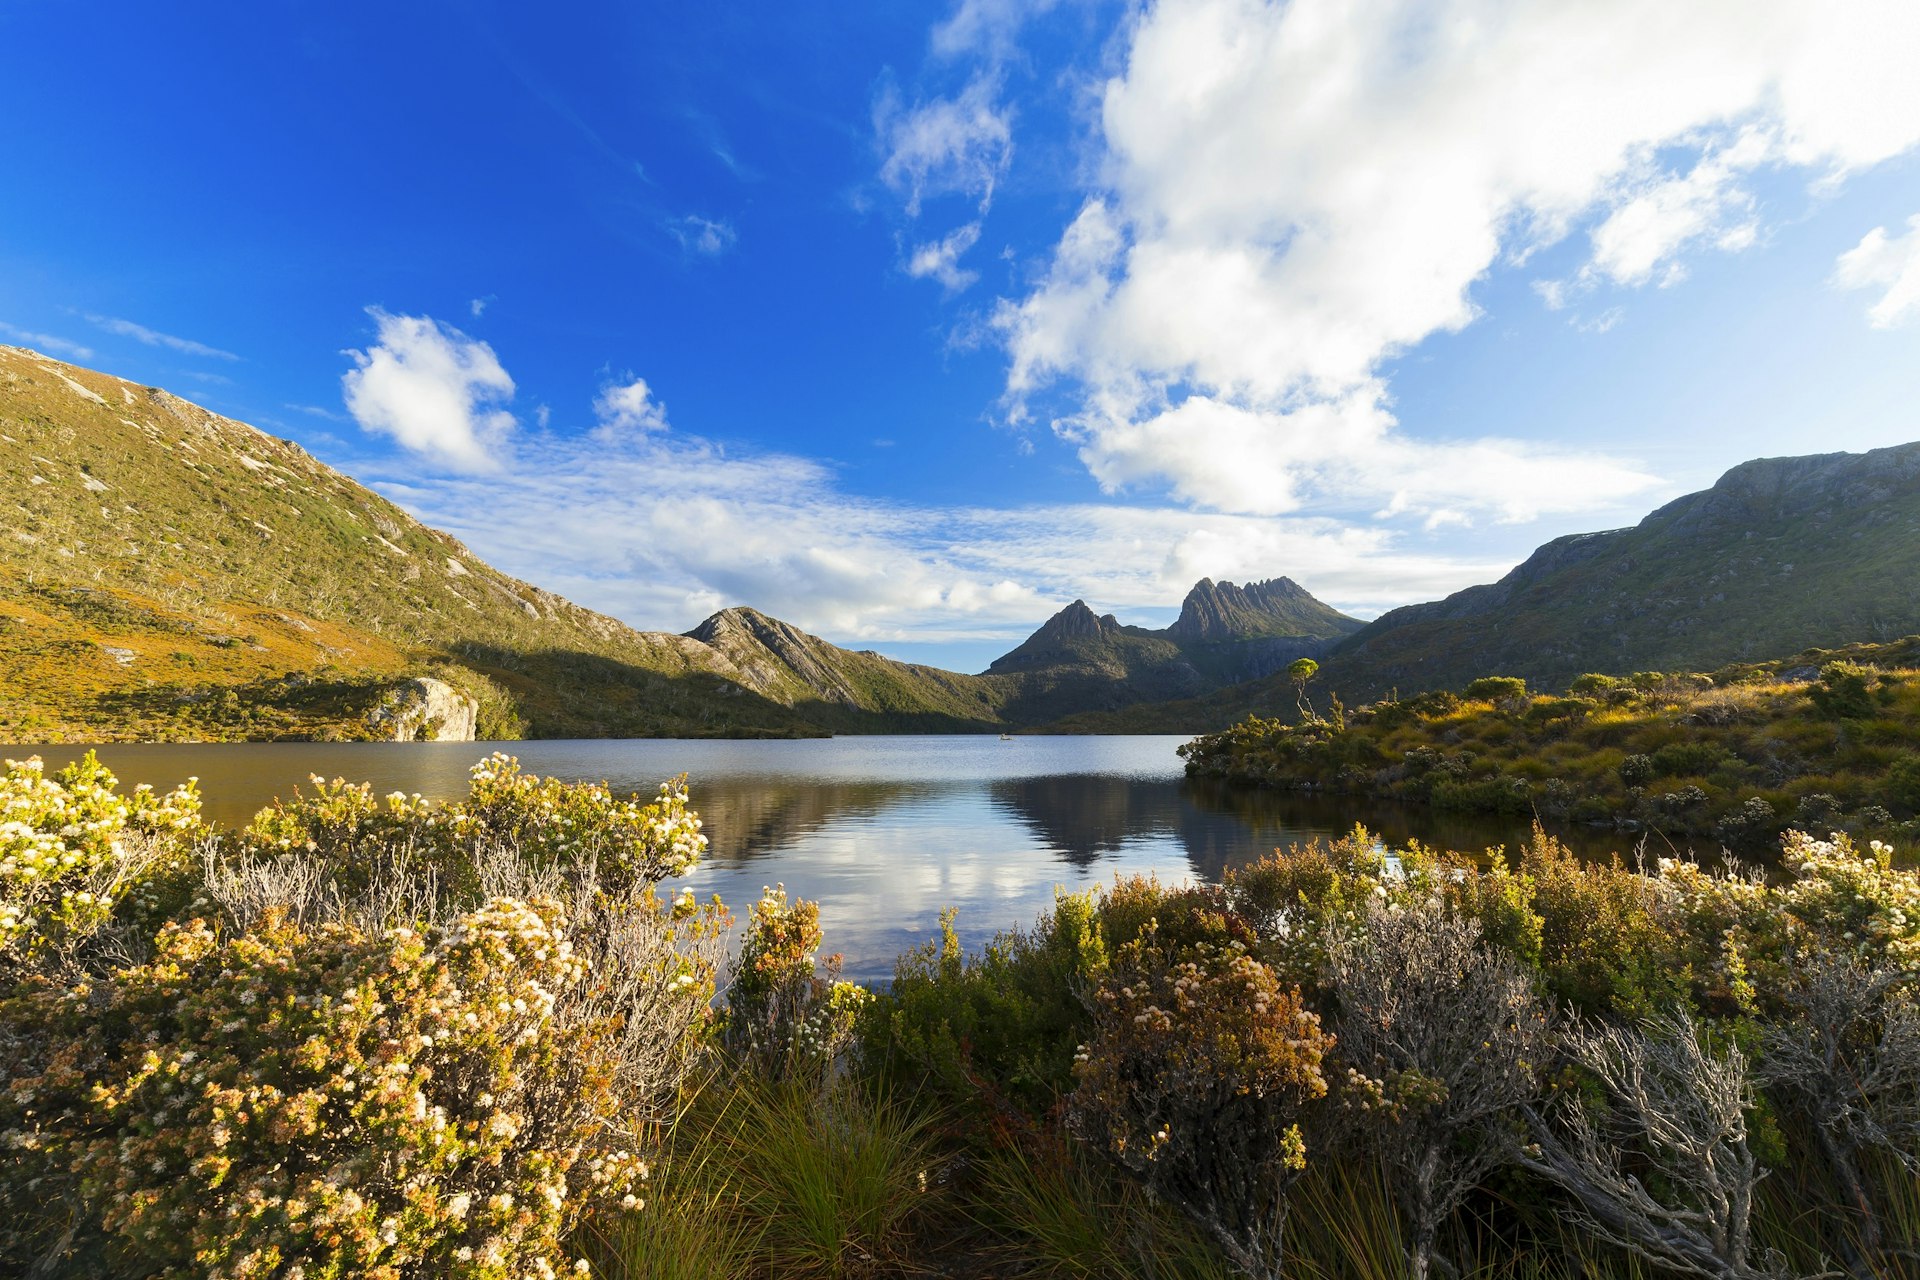 Dove Lake is a corrie lake formed by glaciation; its fringed with heather and green sloping hills. In the distance is the jagged ridge of Cradle Mountain.